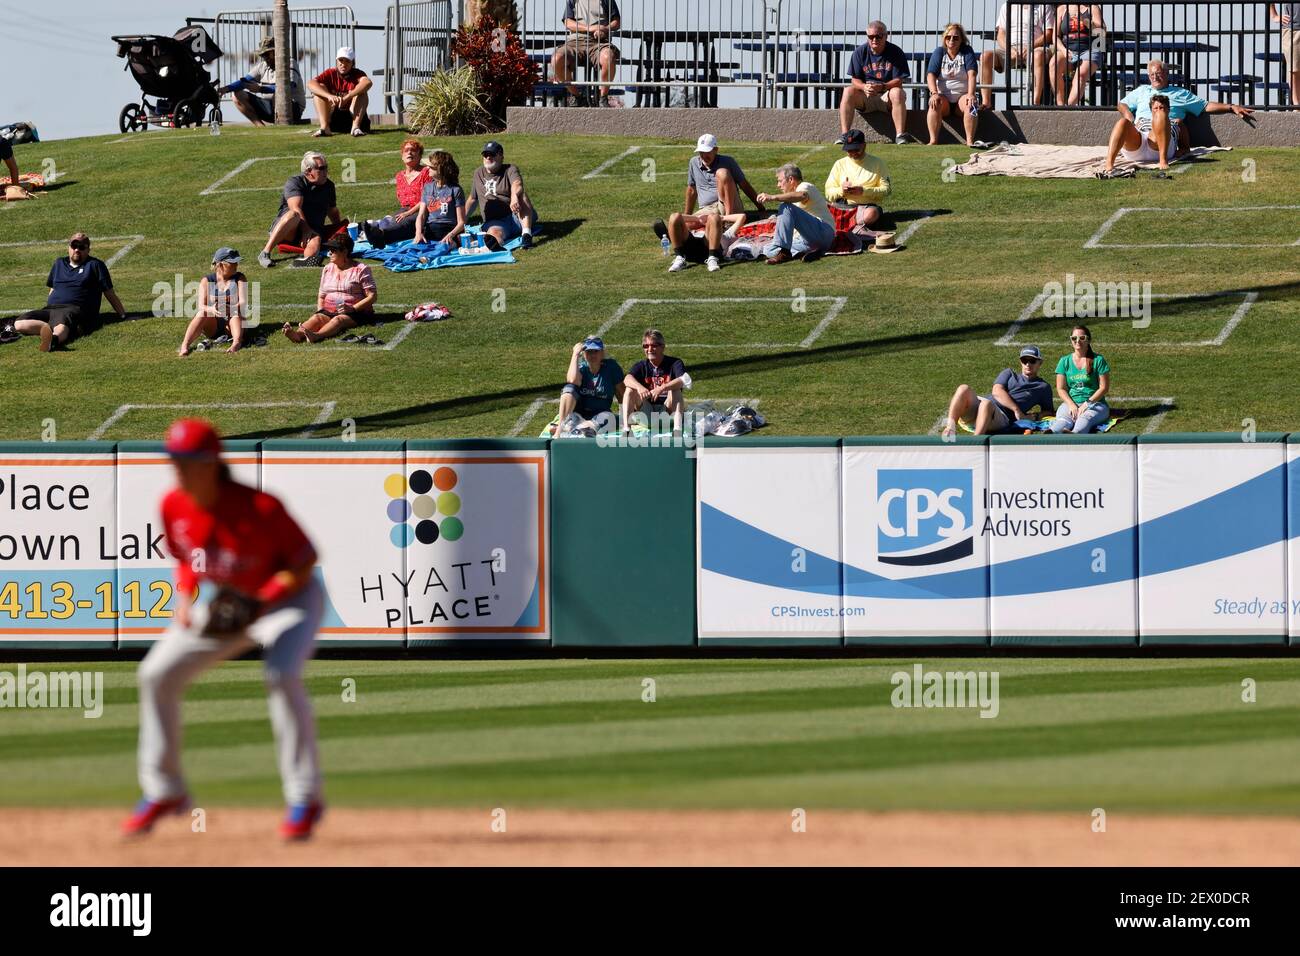 LAKELAND, FL - MARCH 3: General view as fans are socially distanced in the outfield grass while watching a Grapefruit League baseball game between the Stock Photo